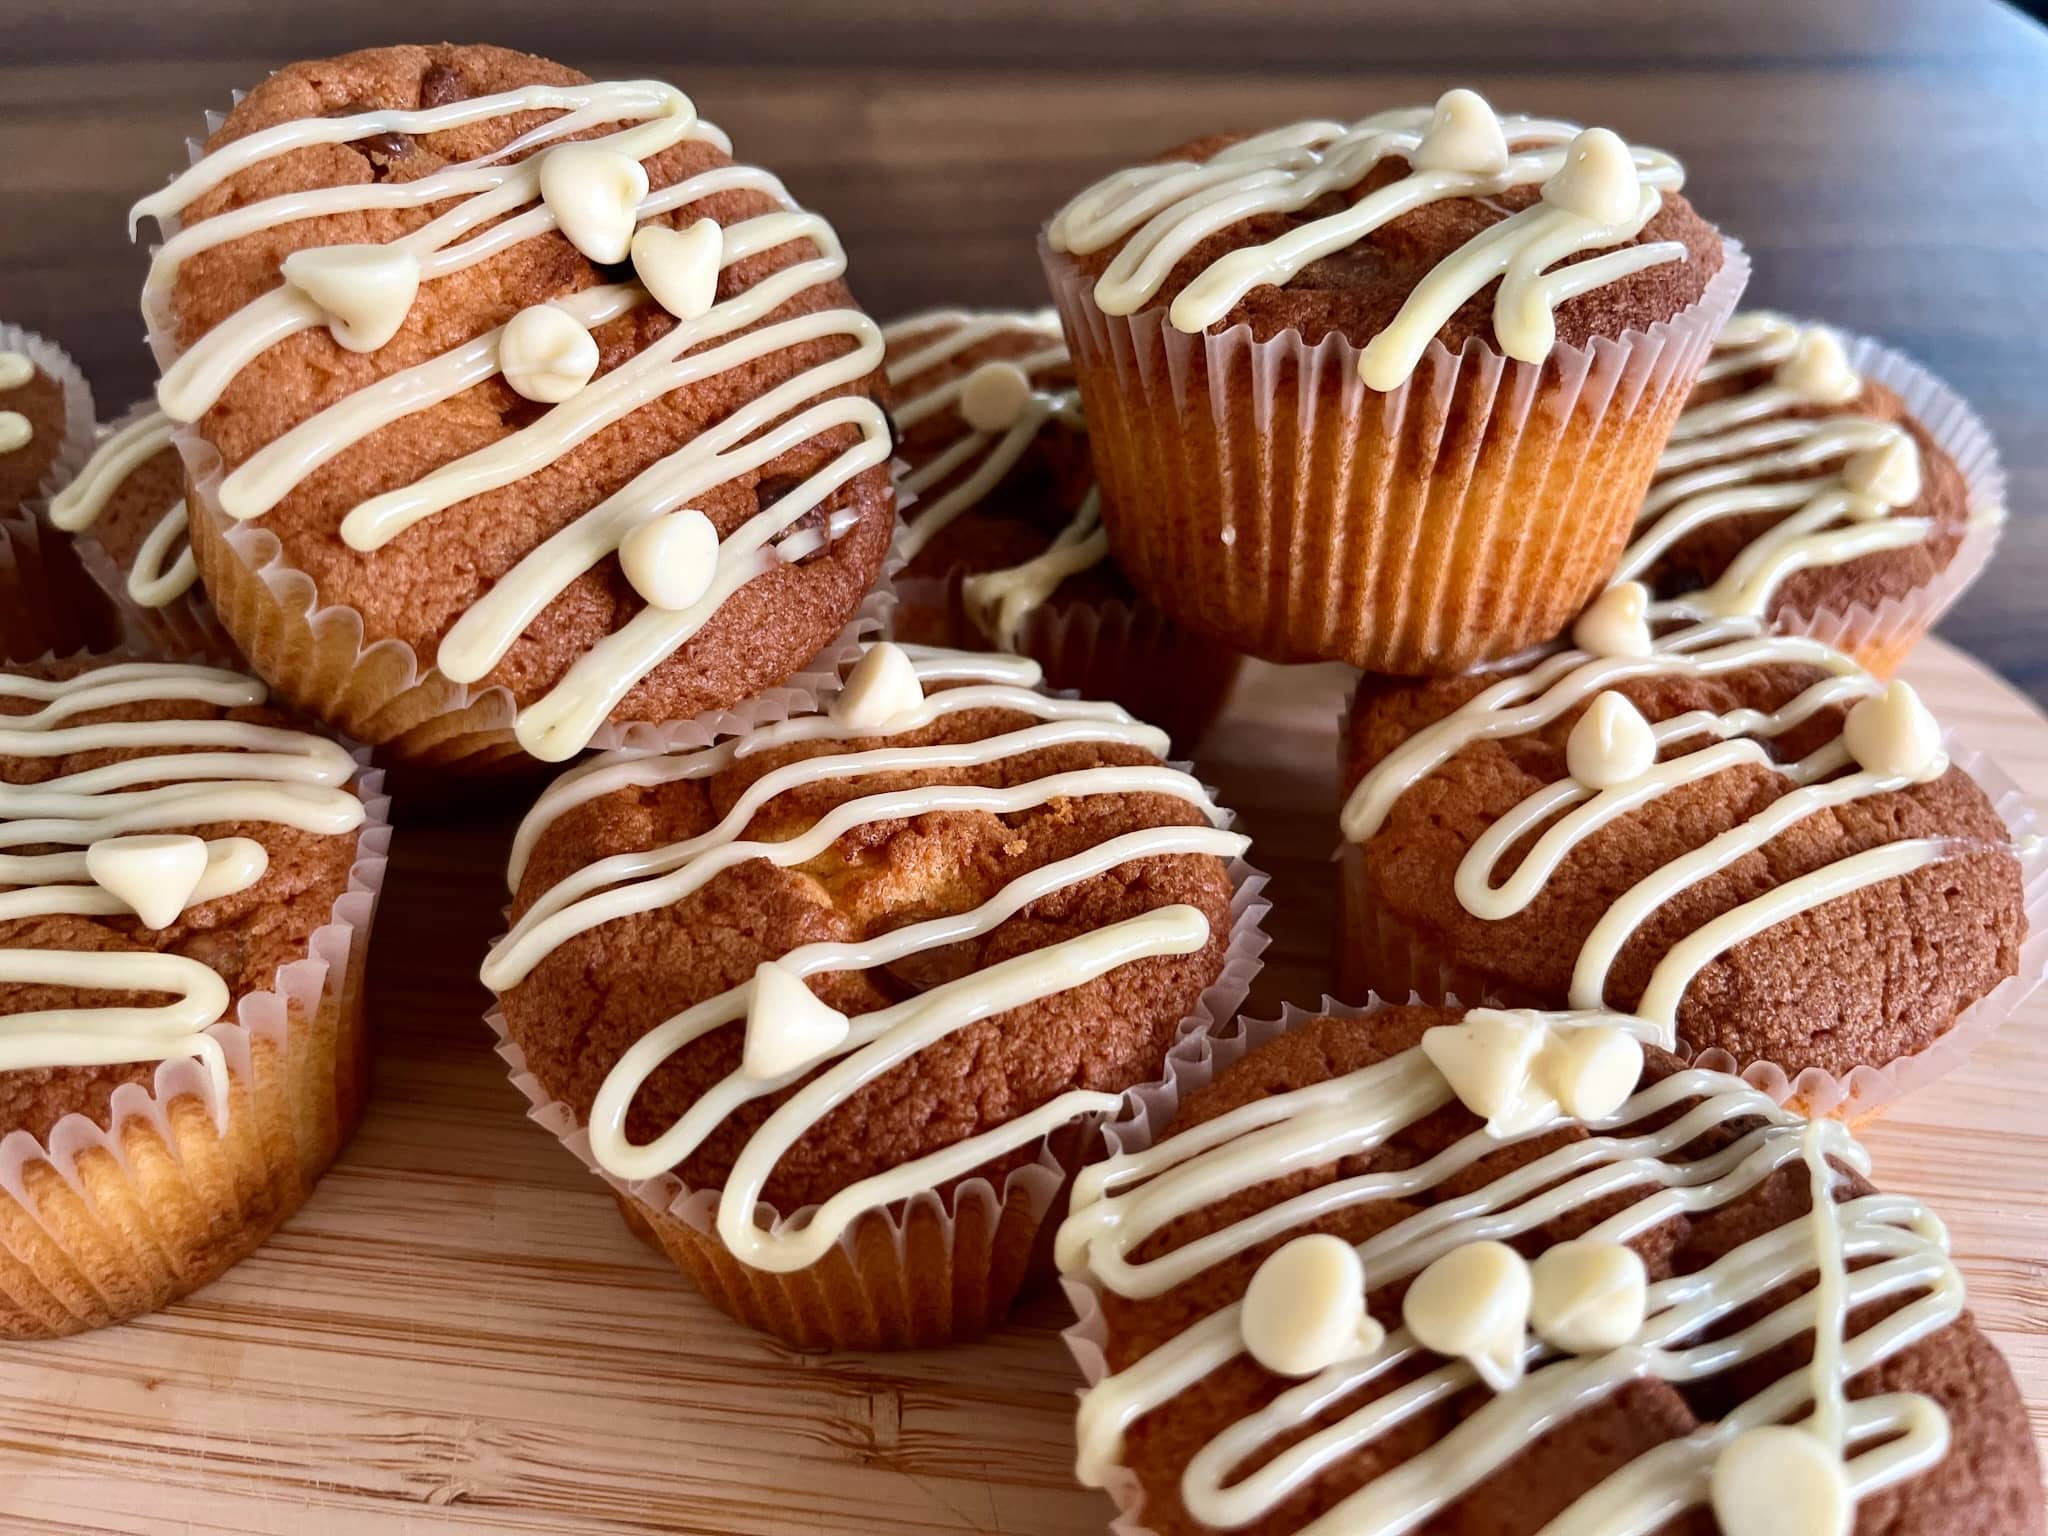 Nicely decorated white chocolate muffins